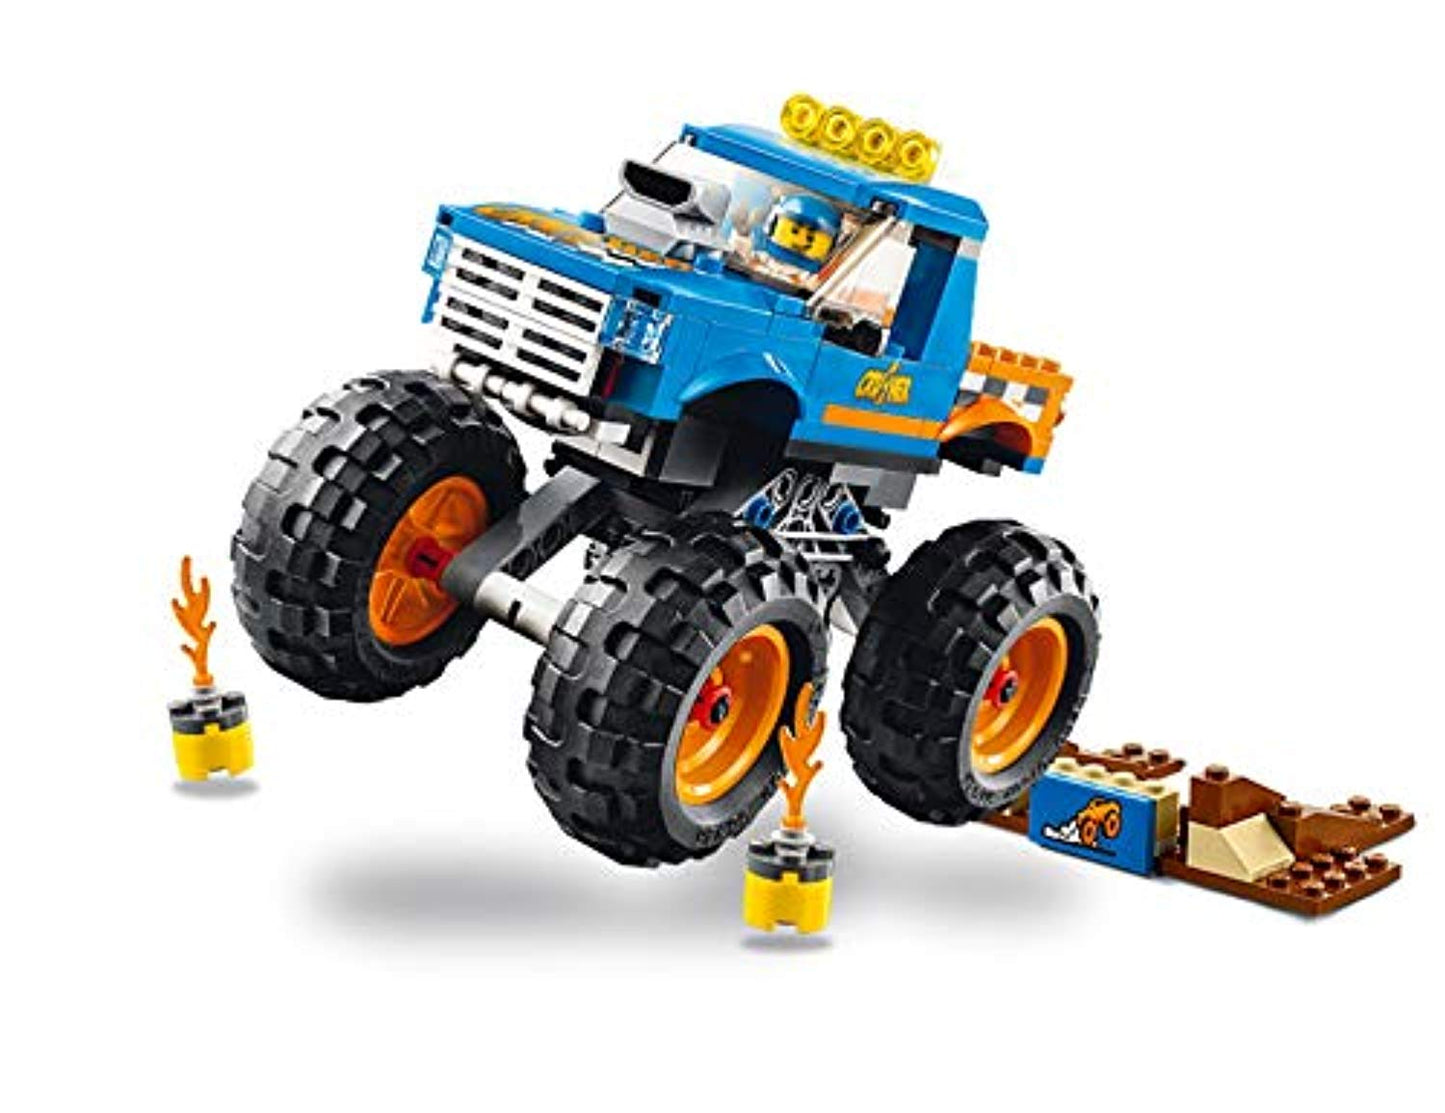 LEGO 60180 City Great Vehicles Monster Truck Toy with Driver and Stunt Show Accessories, Car Sets for Kids - Offer Games